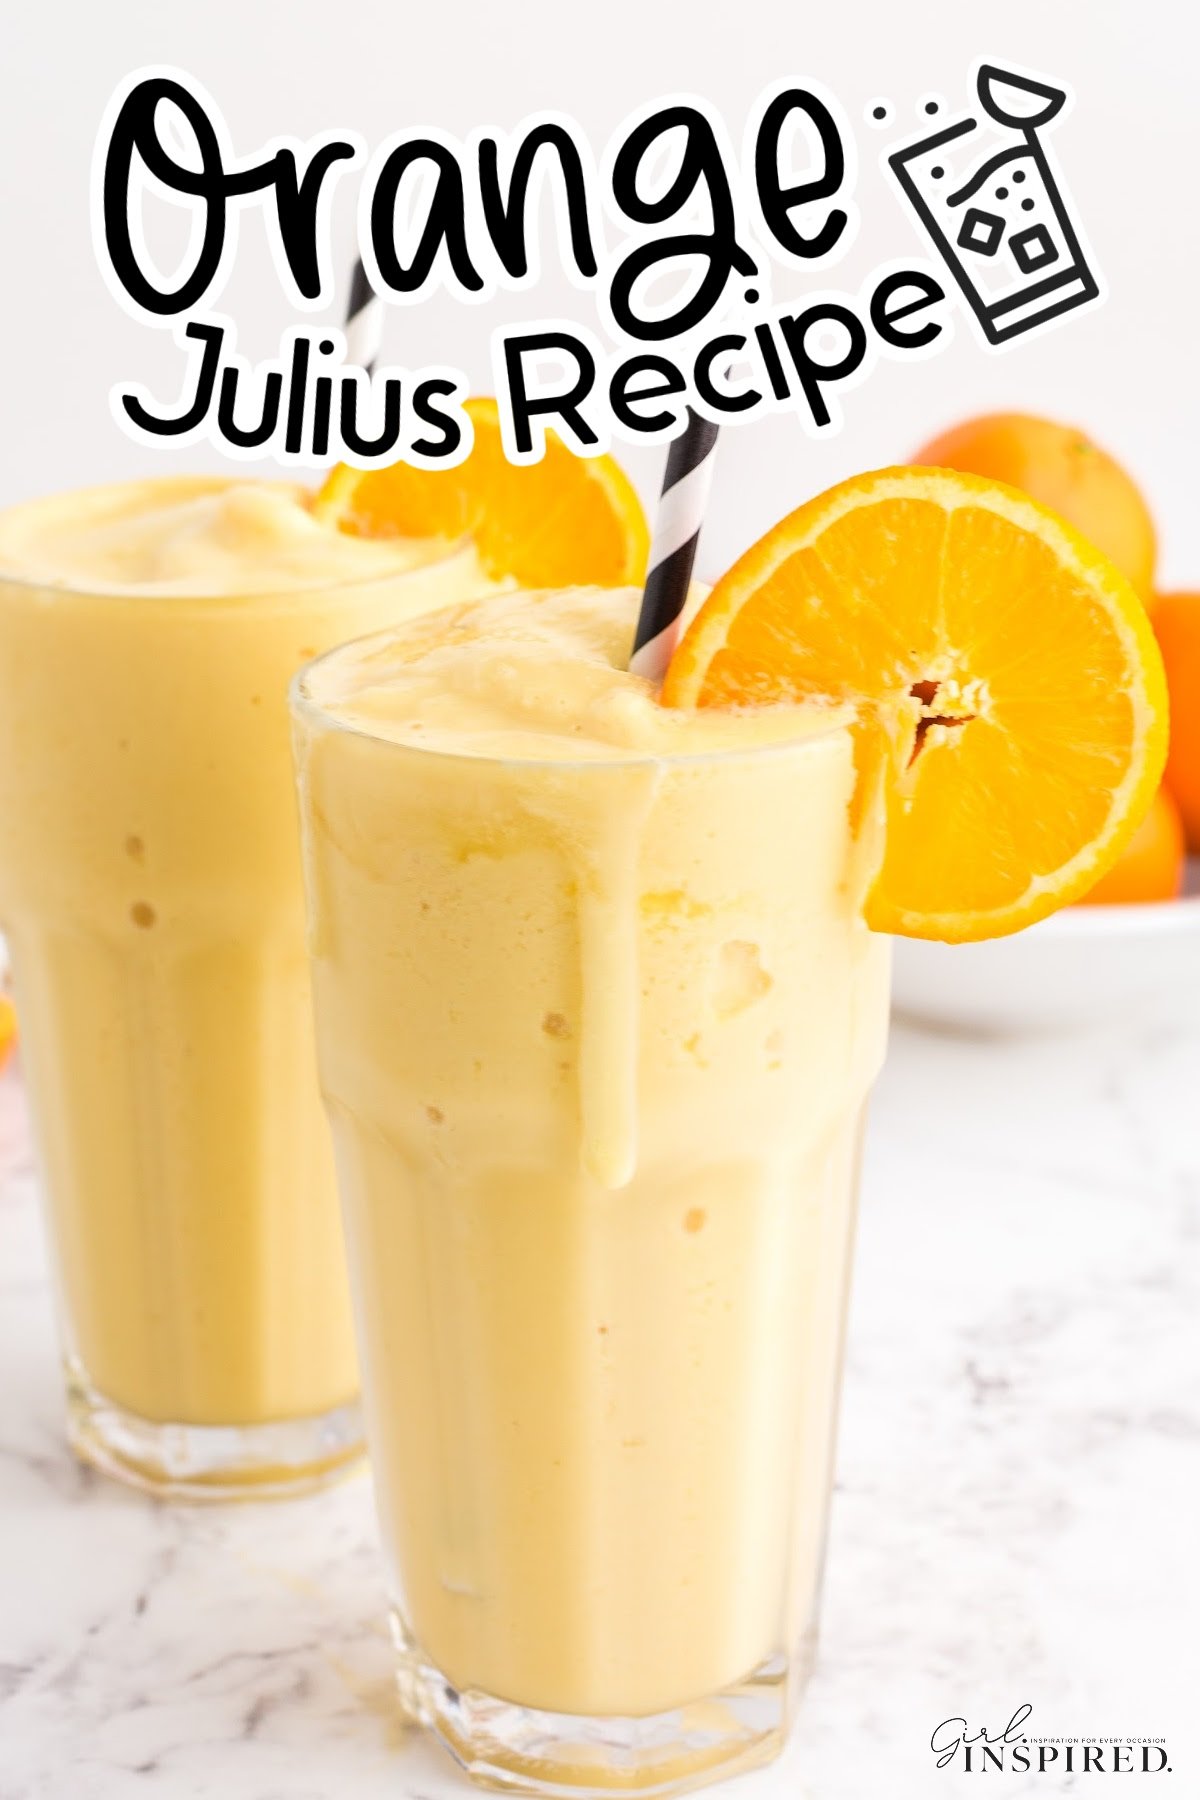 Two glasses of Orange Julius with orange slice garnish and decorative straws and orange Julius overflowing from the front glass, with text title "Orange Julius Recipe."